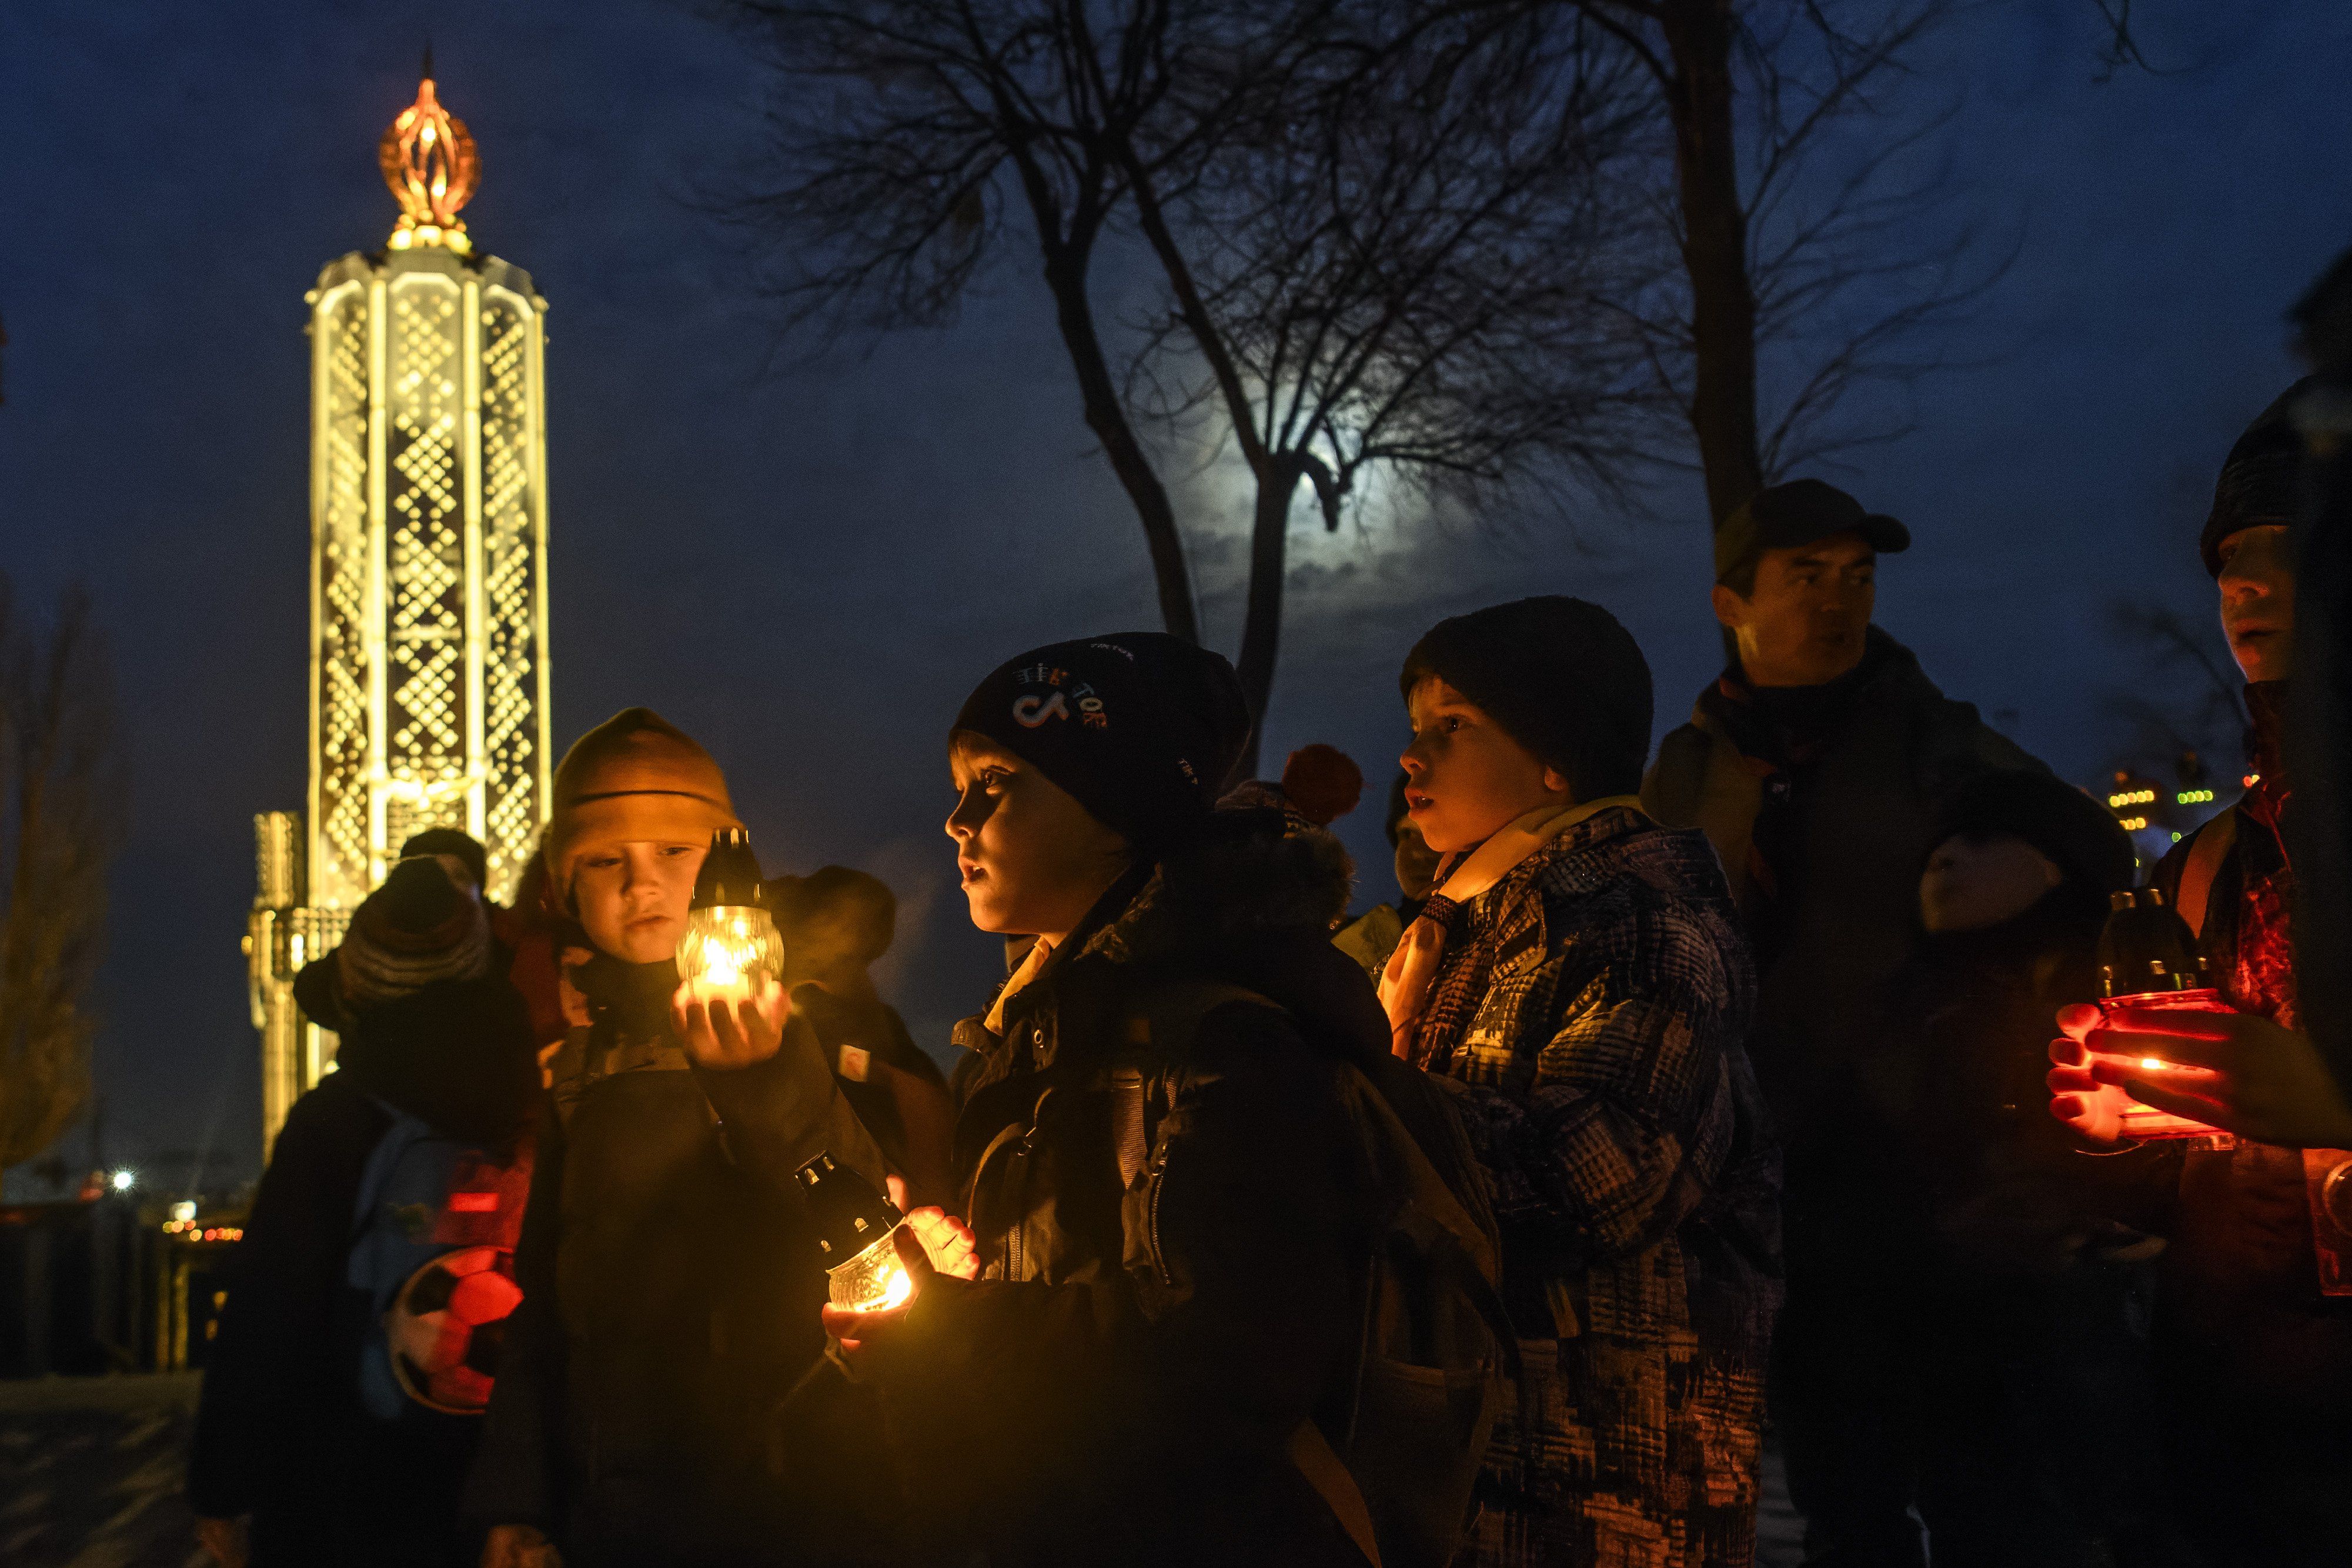 Ukrainians visit a monument to Holodomor victims during a commemoration ceremony marking the 90th anniversary of the famine of 1932-33, against a backdrop of Russian drones attacking Kyiv.